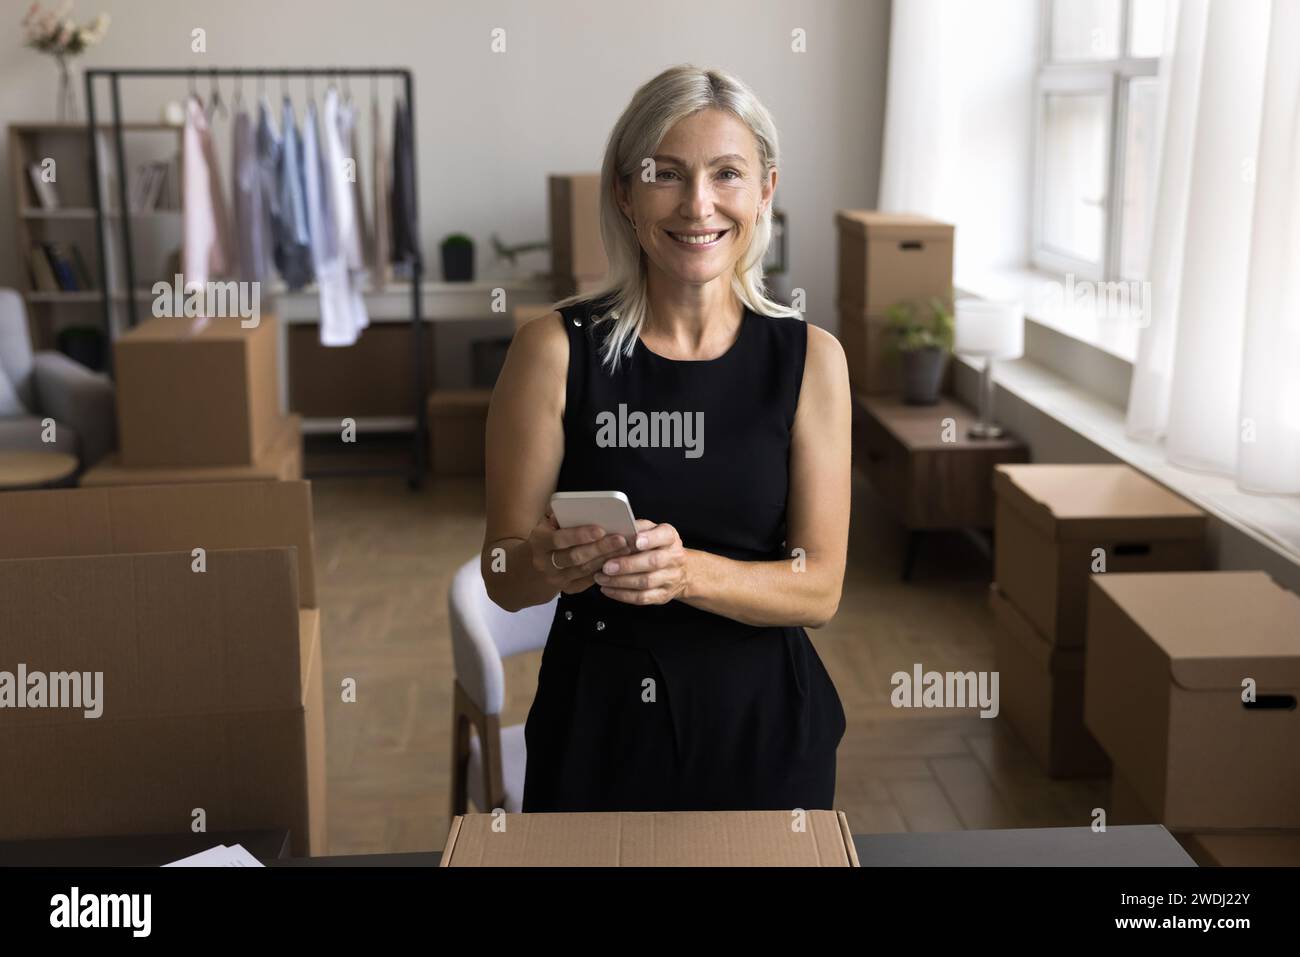 Attractive middle-aged woman holds cellphone ordering delivery courier services Stock Photo